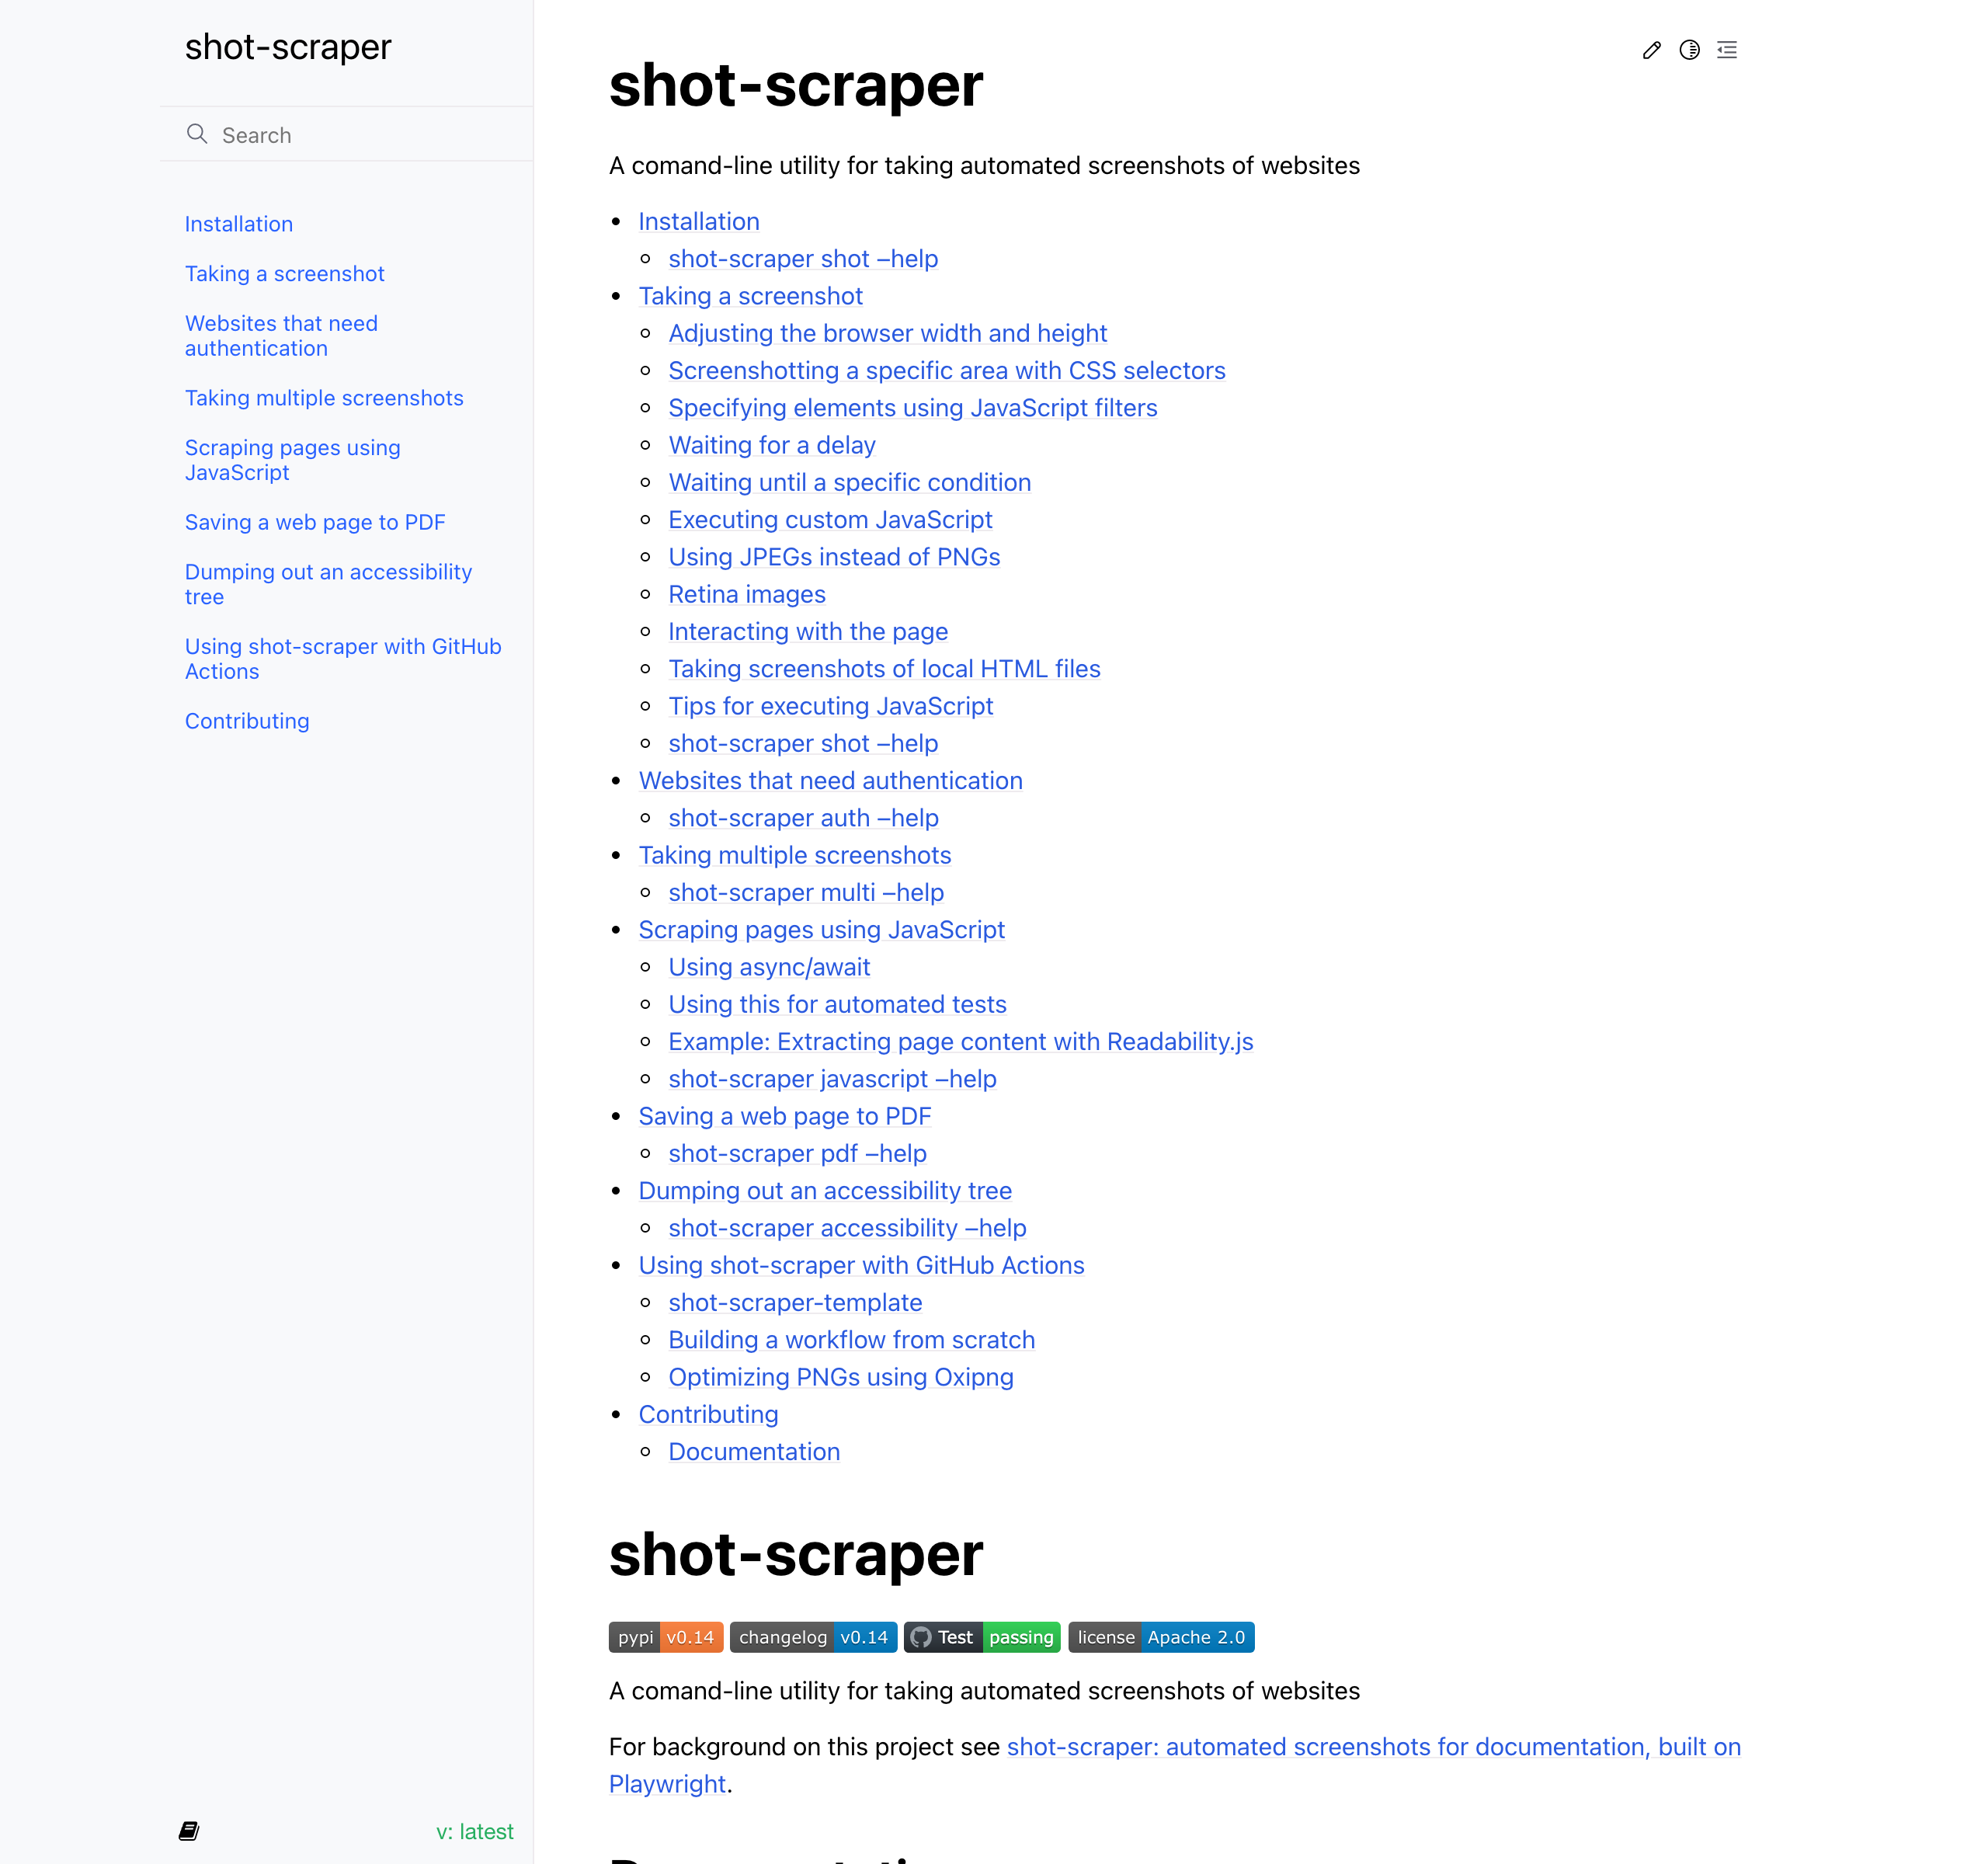 A screenshot of the shot-scraper documentation, showing the table of contents